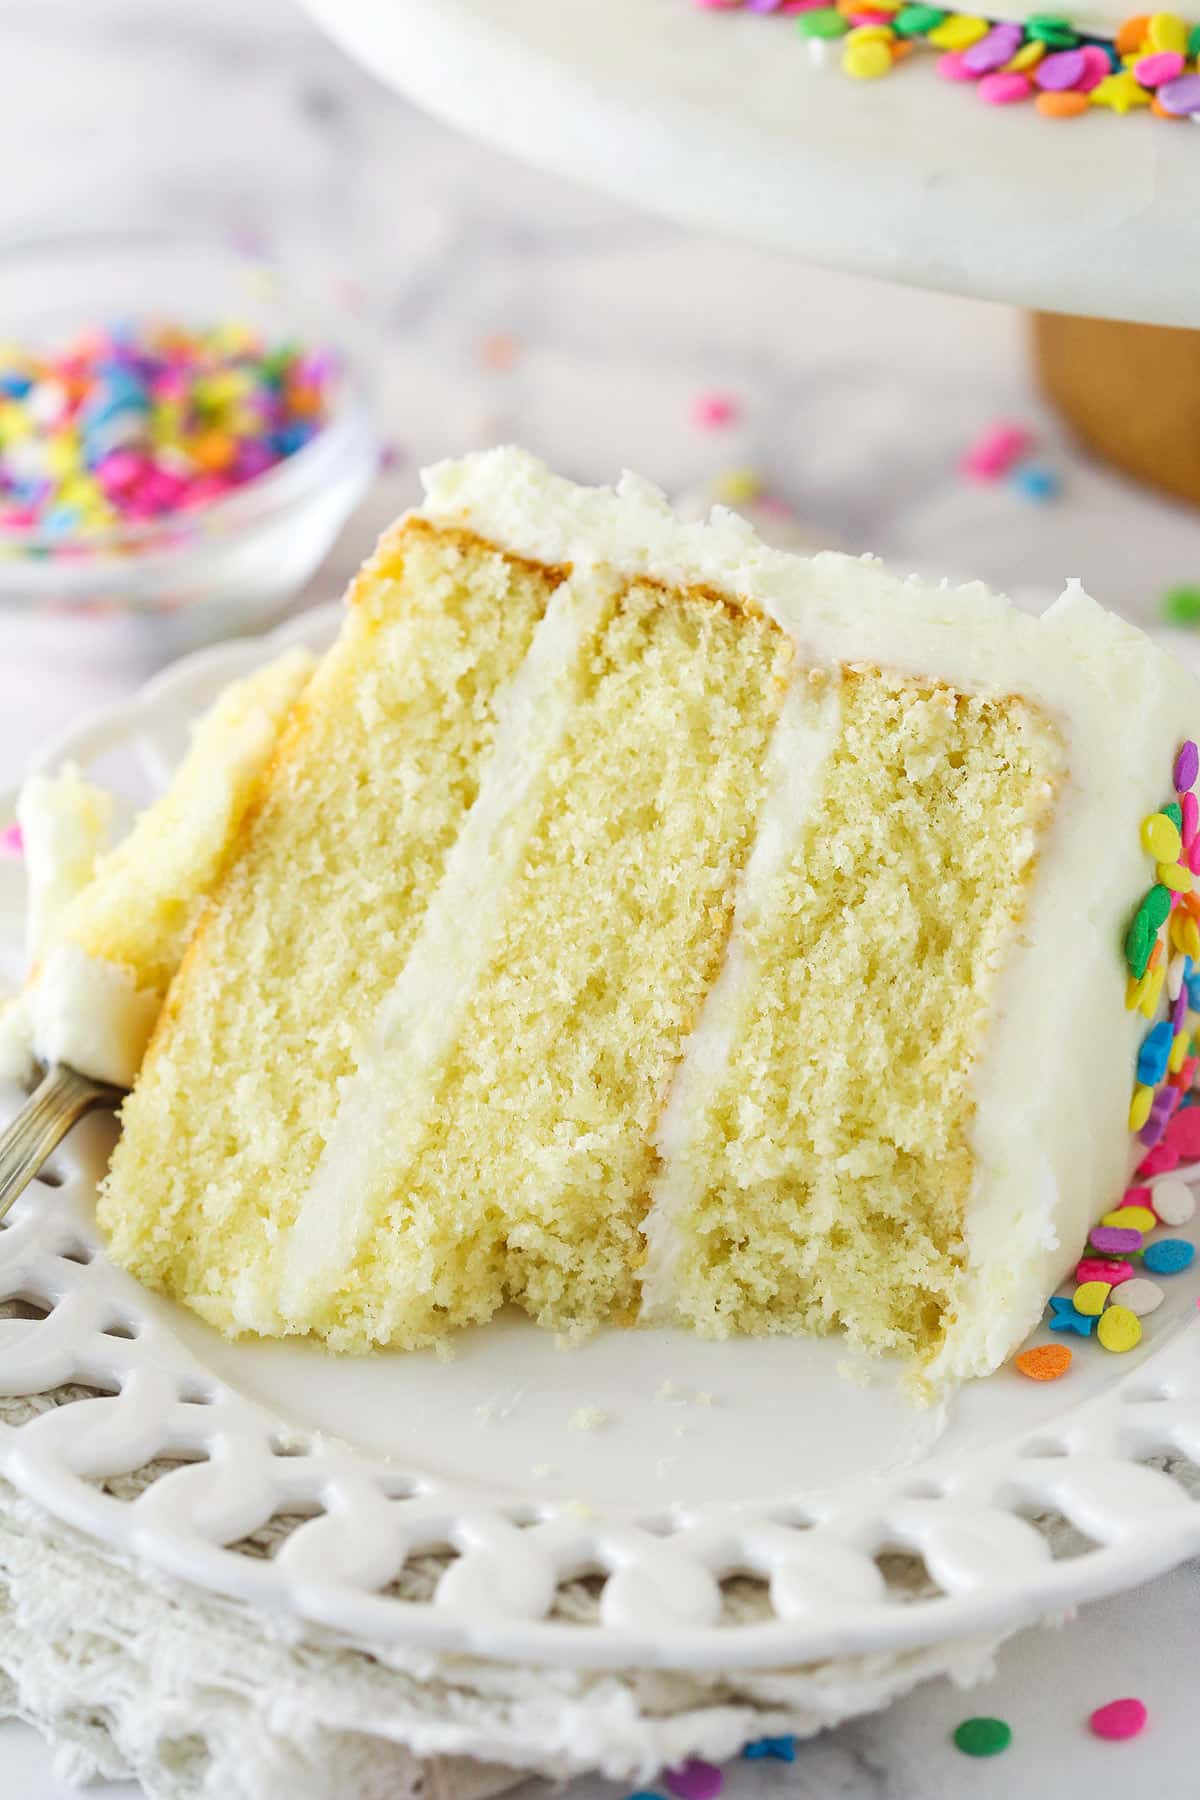 A slice of moist vanilla layer cake on a plate with a bite taken out of it.